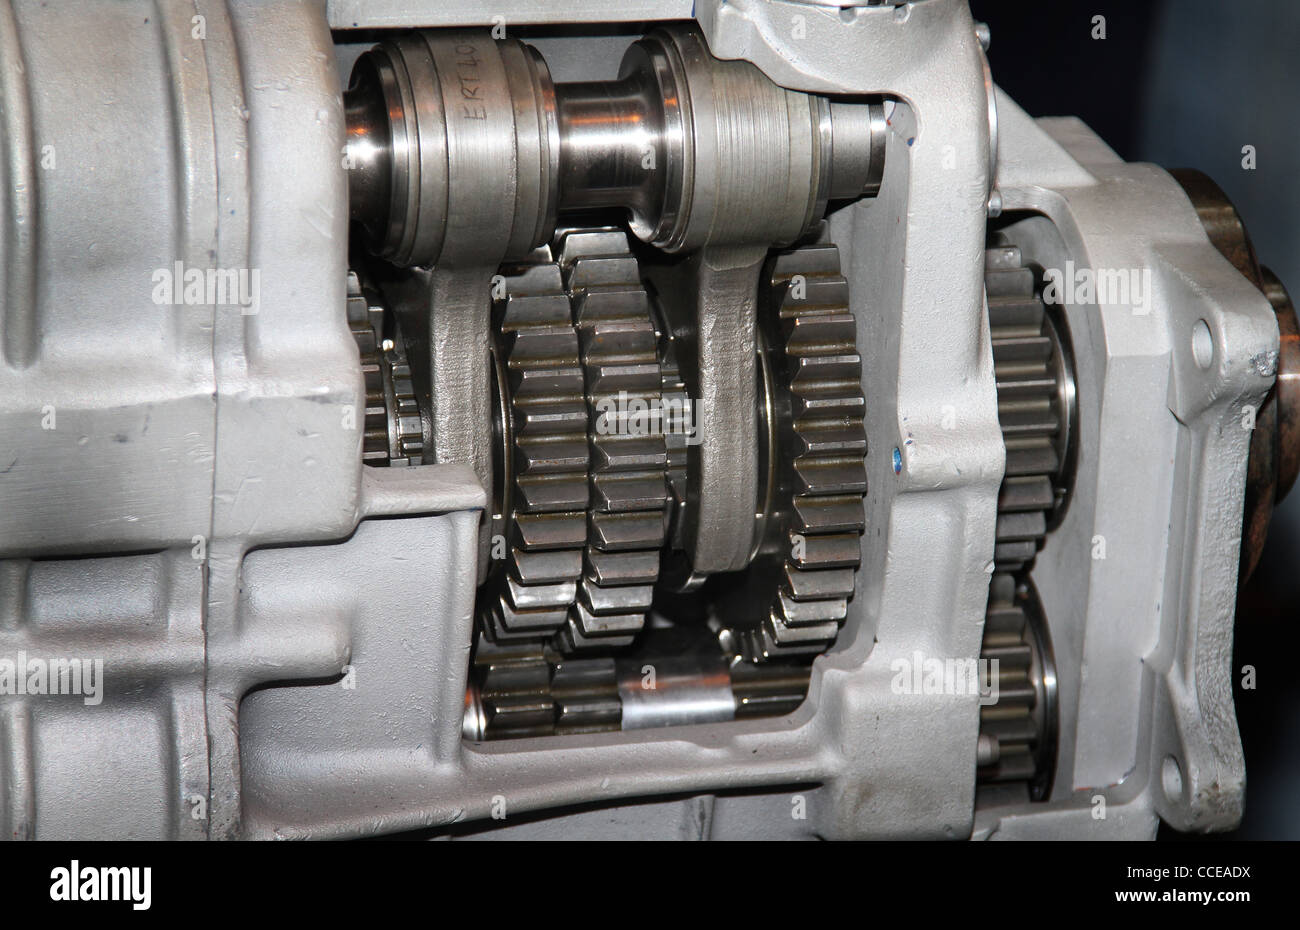 Internal view of cogs in modern gear box. Stock Photo